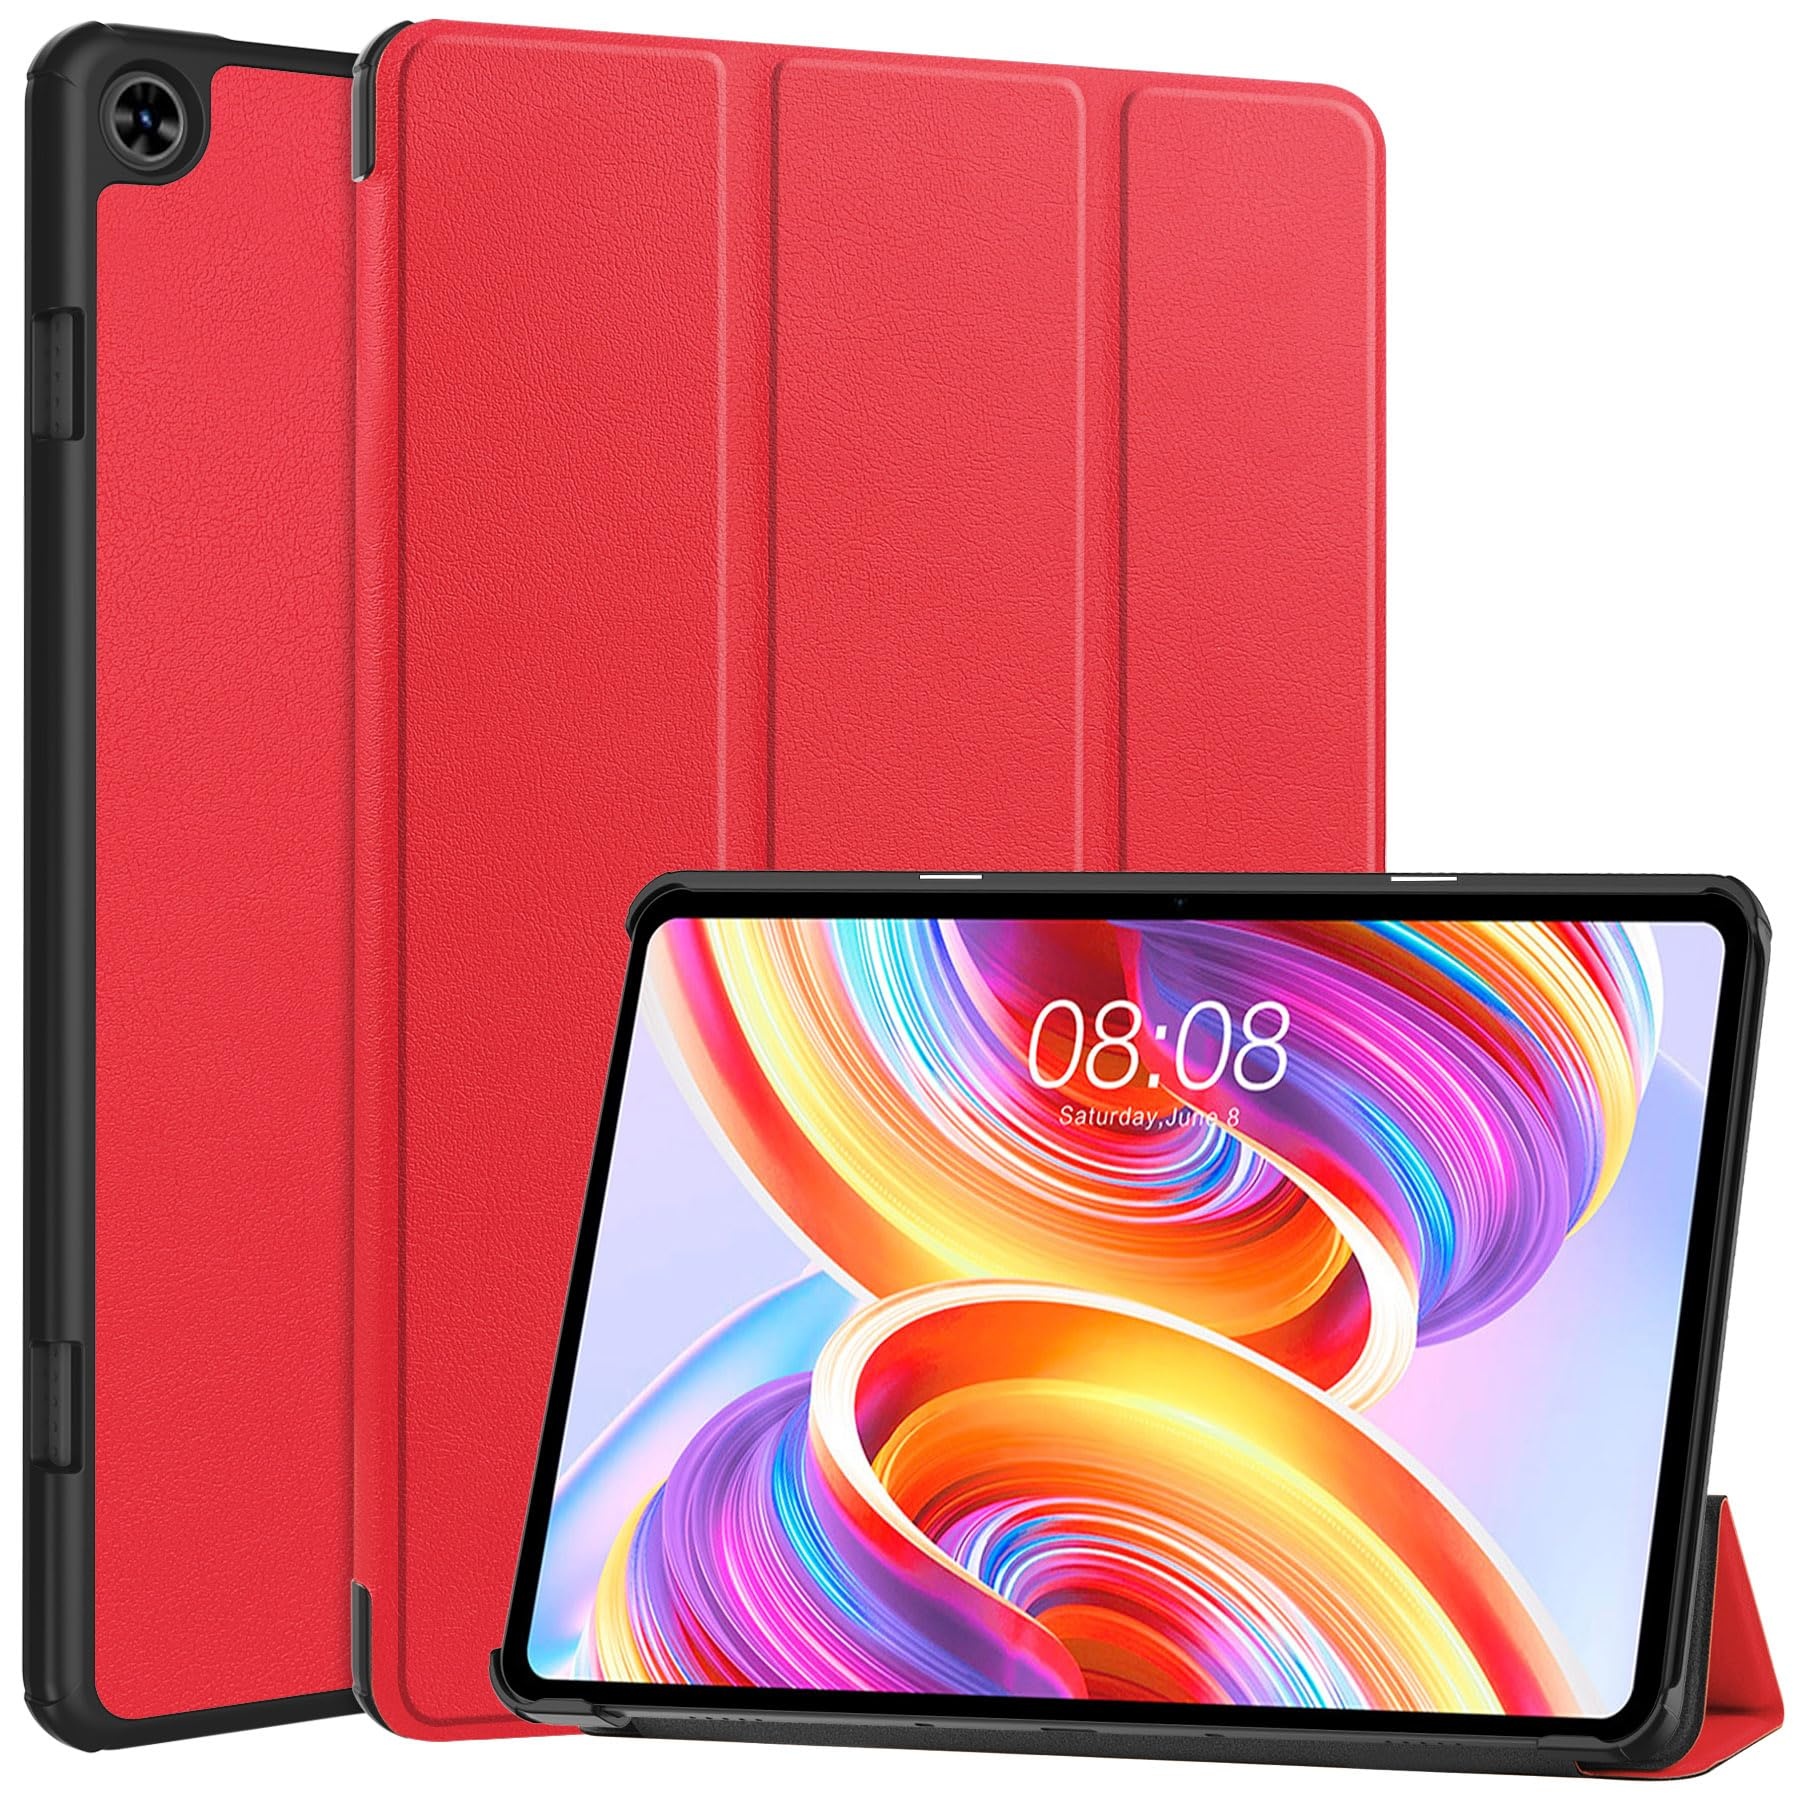 Trifold Case for Teclast T50 11 Inch Tablet (2023) - Folio Flip Slim Fit Premium Solid Color PU Leather Hard Back Stand Cover with Smart Auto Sleep/Wake Feature for TECLAST T50, Red